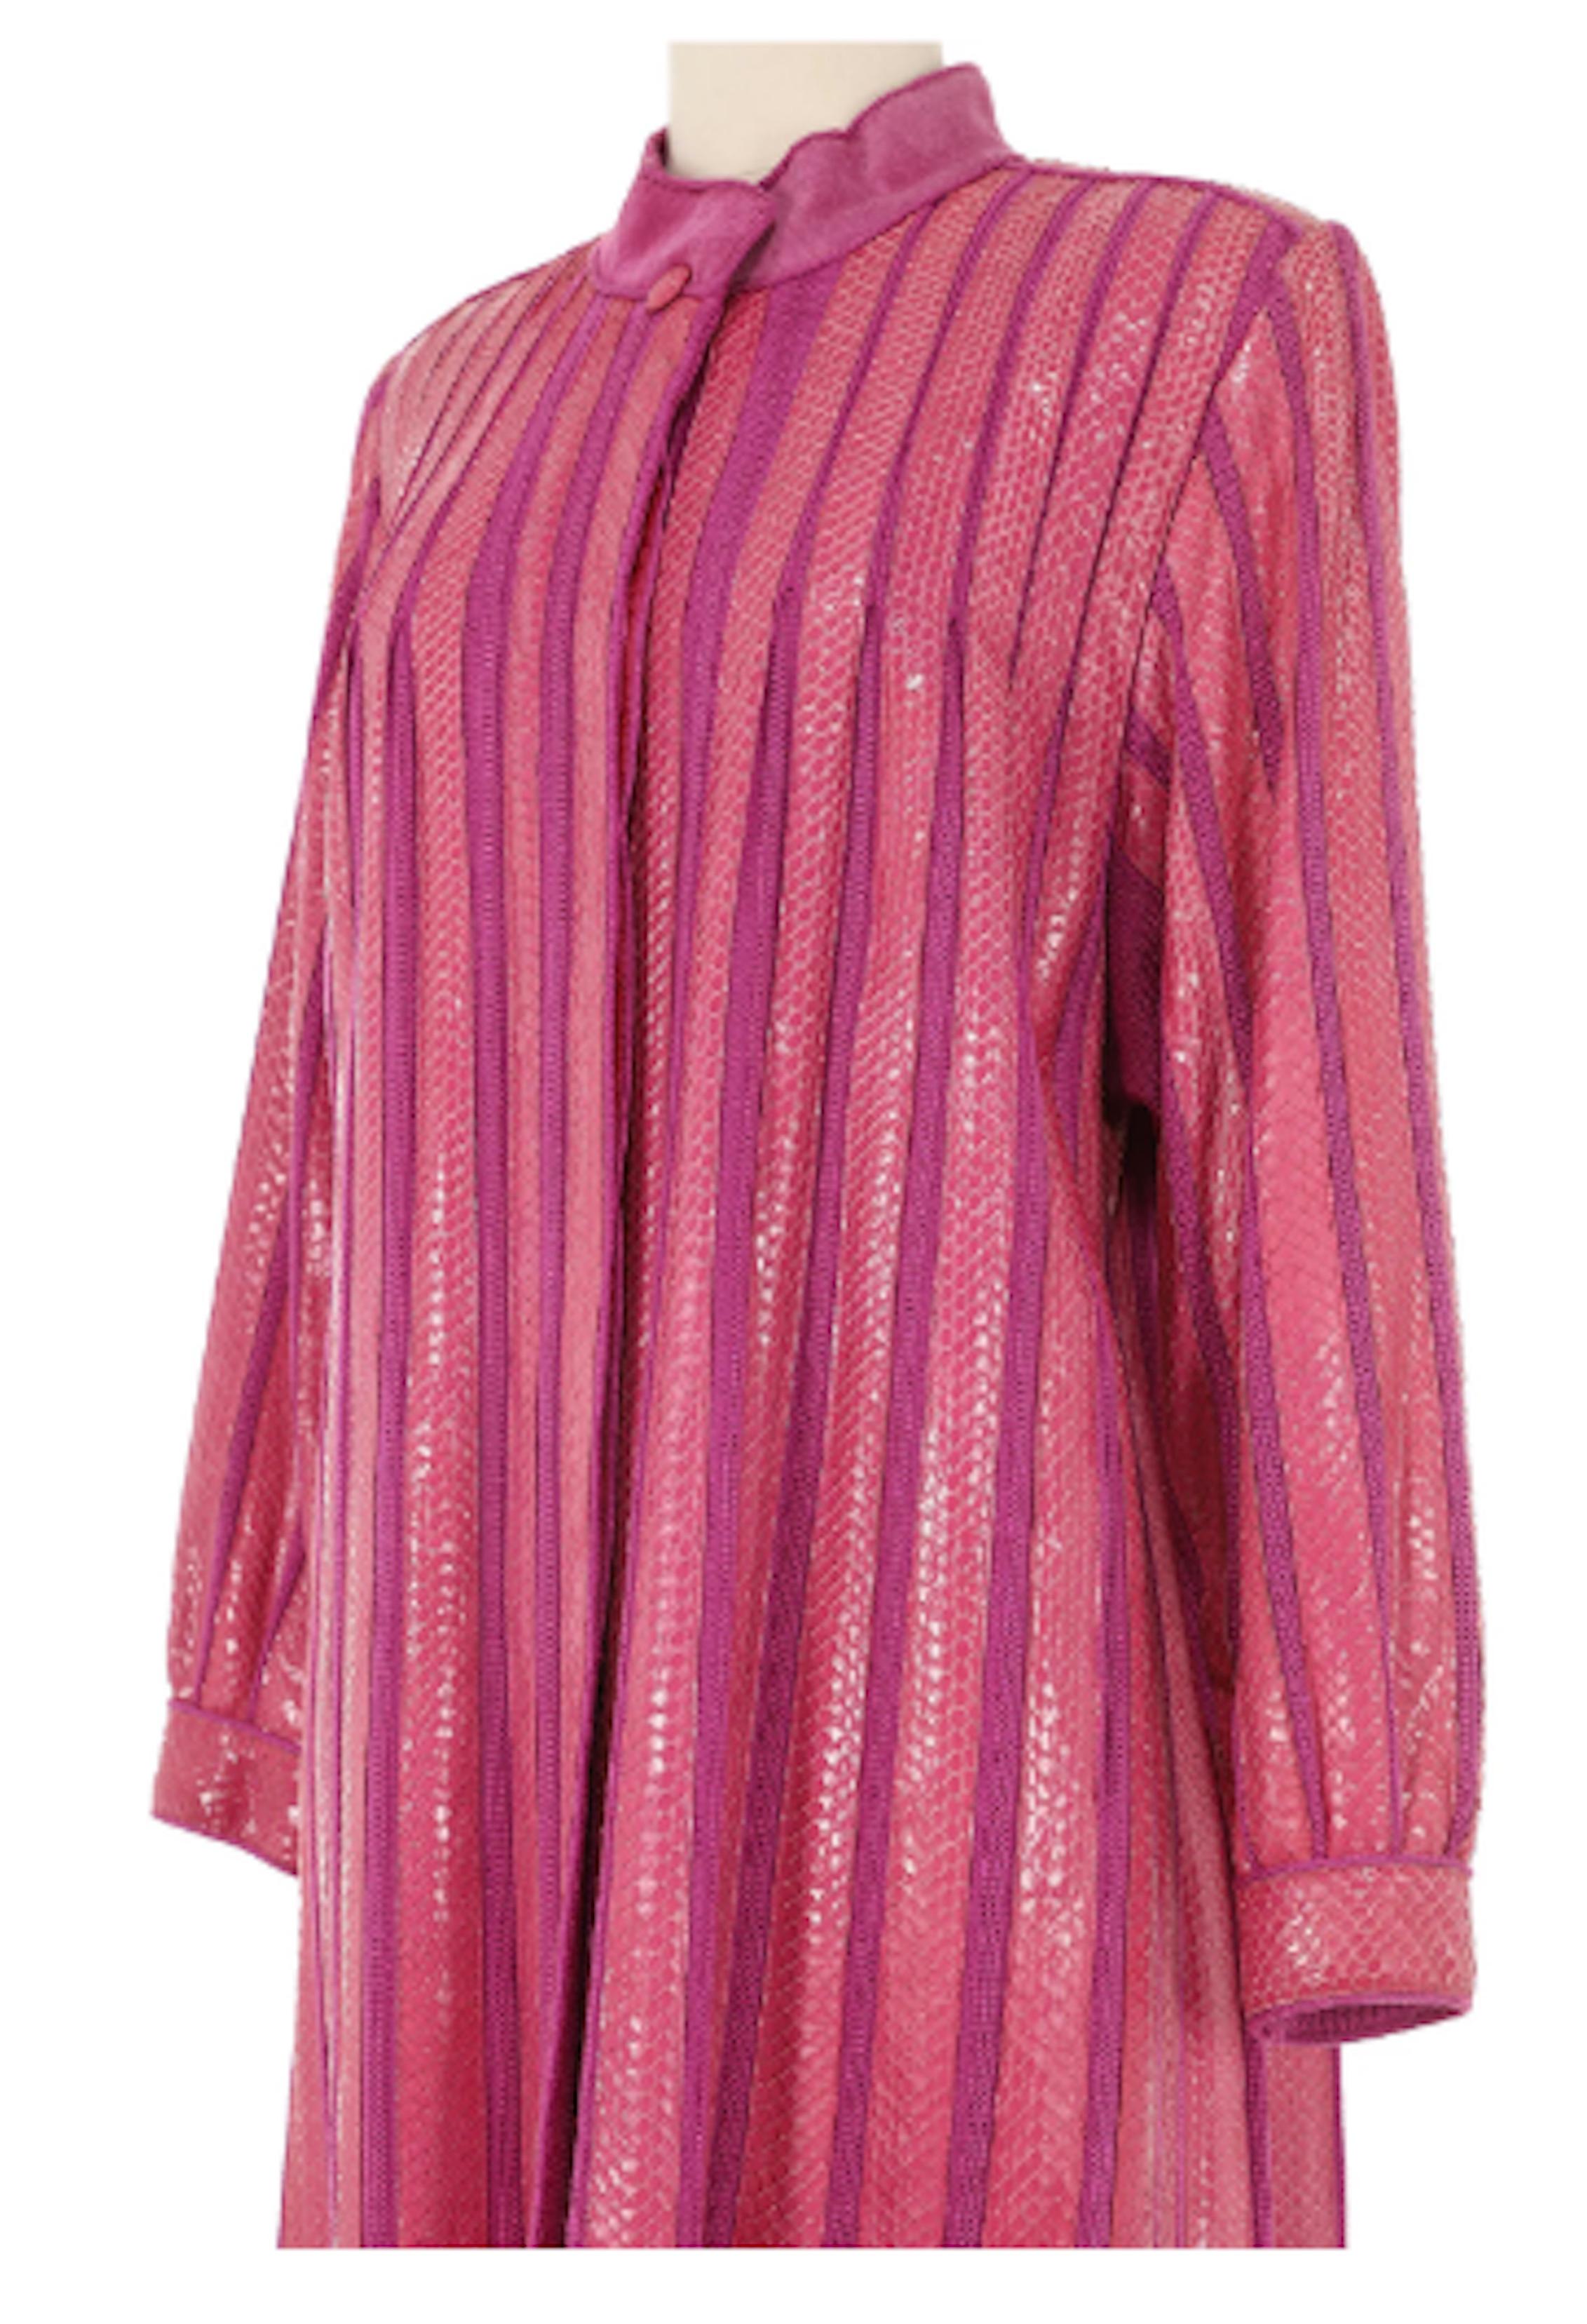 Amen Wardy Long Pink Coat  In Excellent Condition For Sale In New York, NY